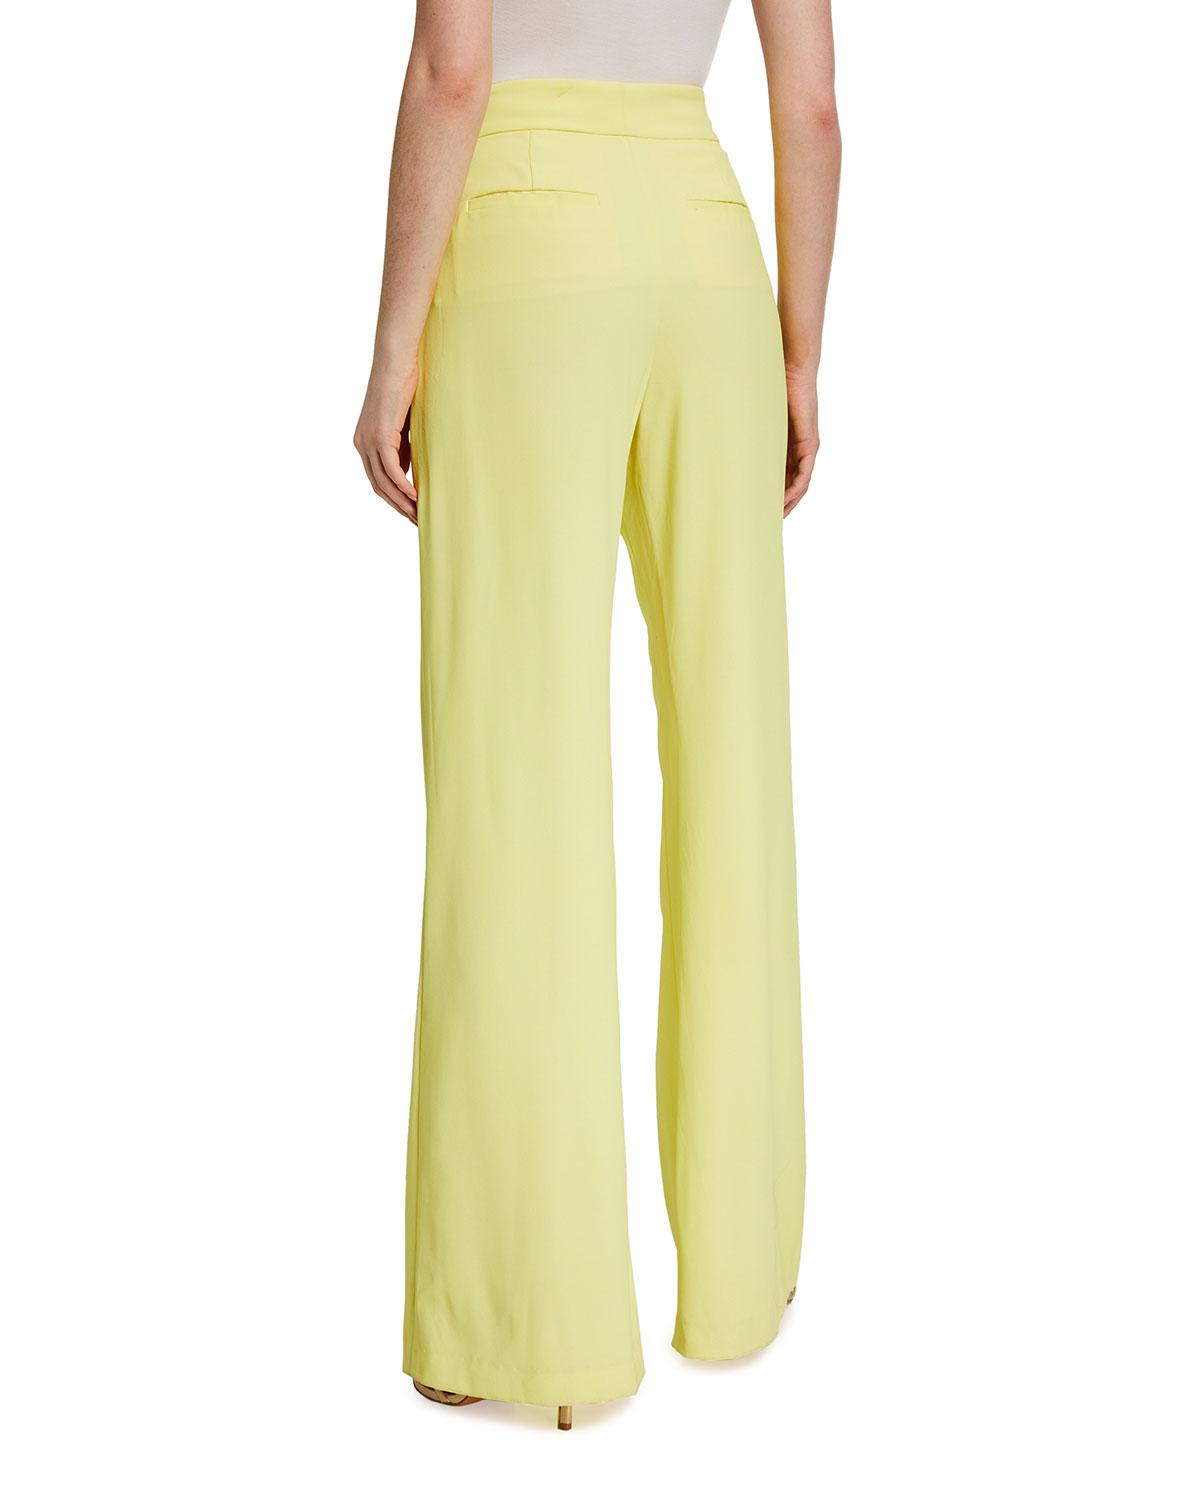 Alice + Olivia Dylan High-waist Wide-leg Pants in Yellow - Lyst